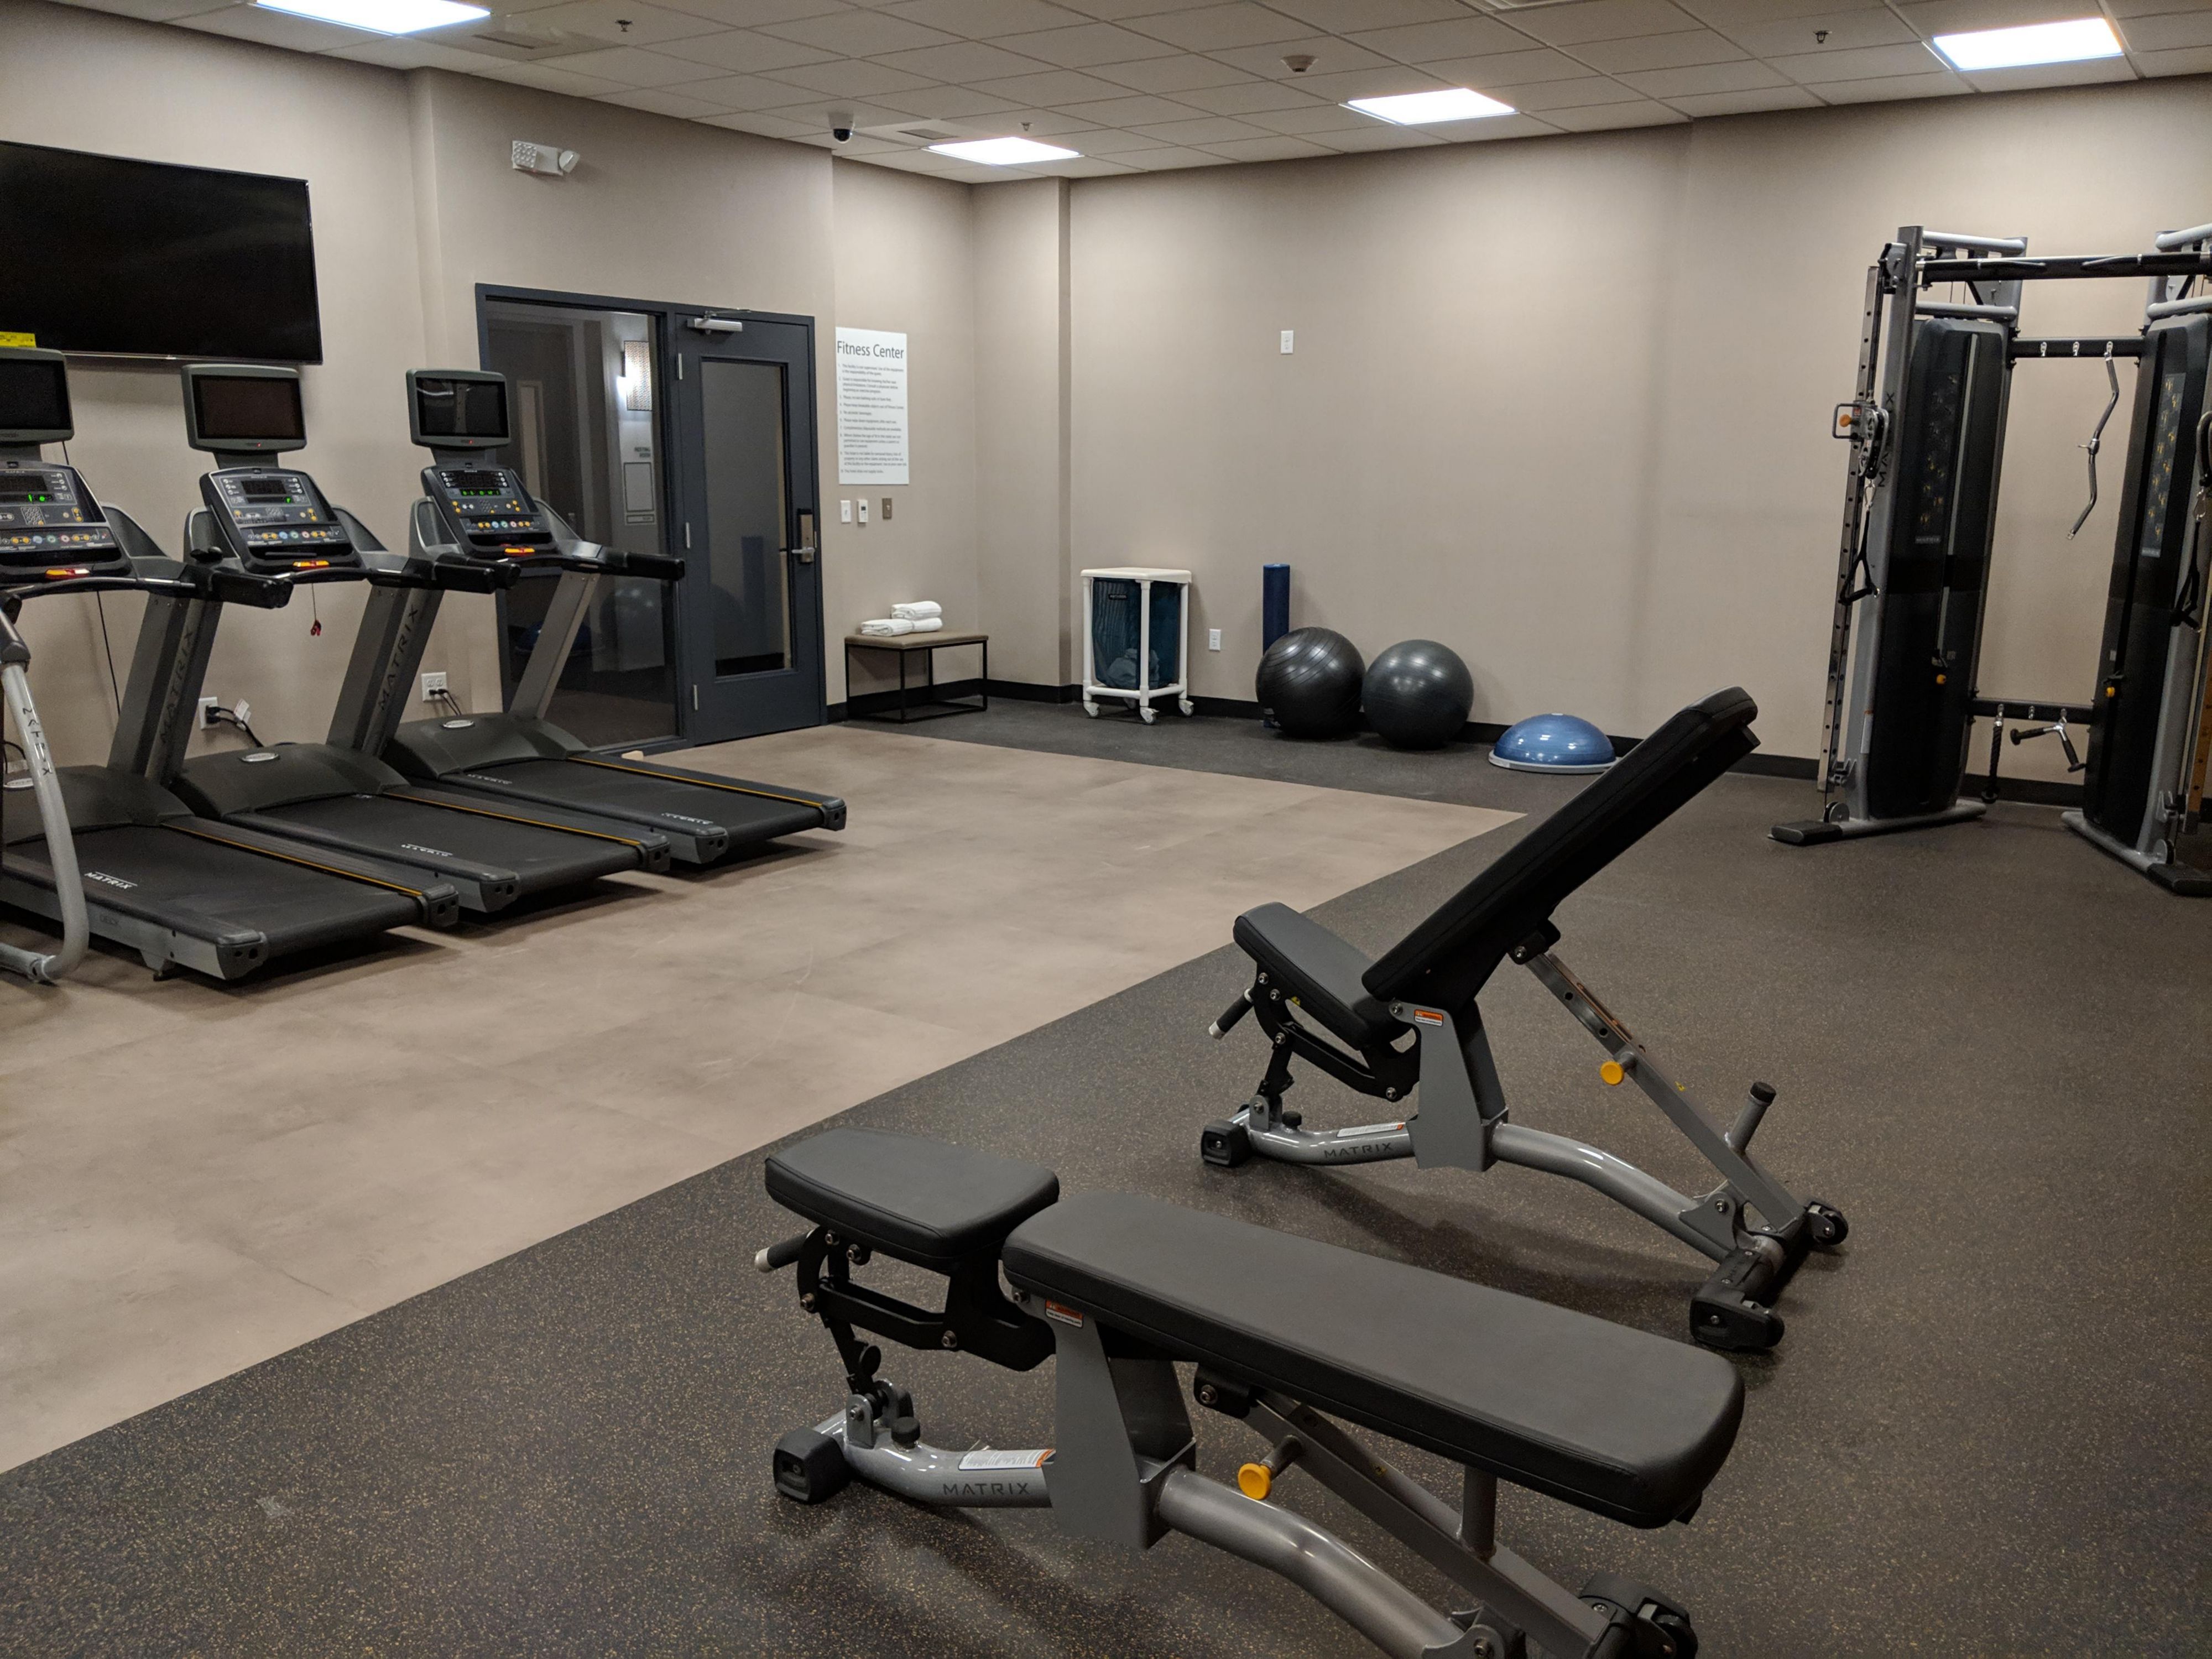 Start your day with a workout or unwind at the end of the day.  Our complimentary Fitness Center is equipped with an elliptical machine, free weights, stationary bicycle, treadmill and more. 